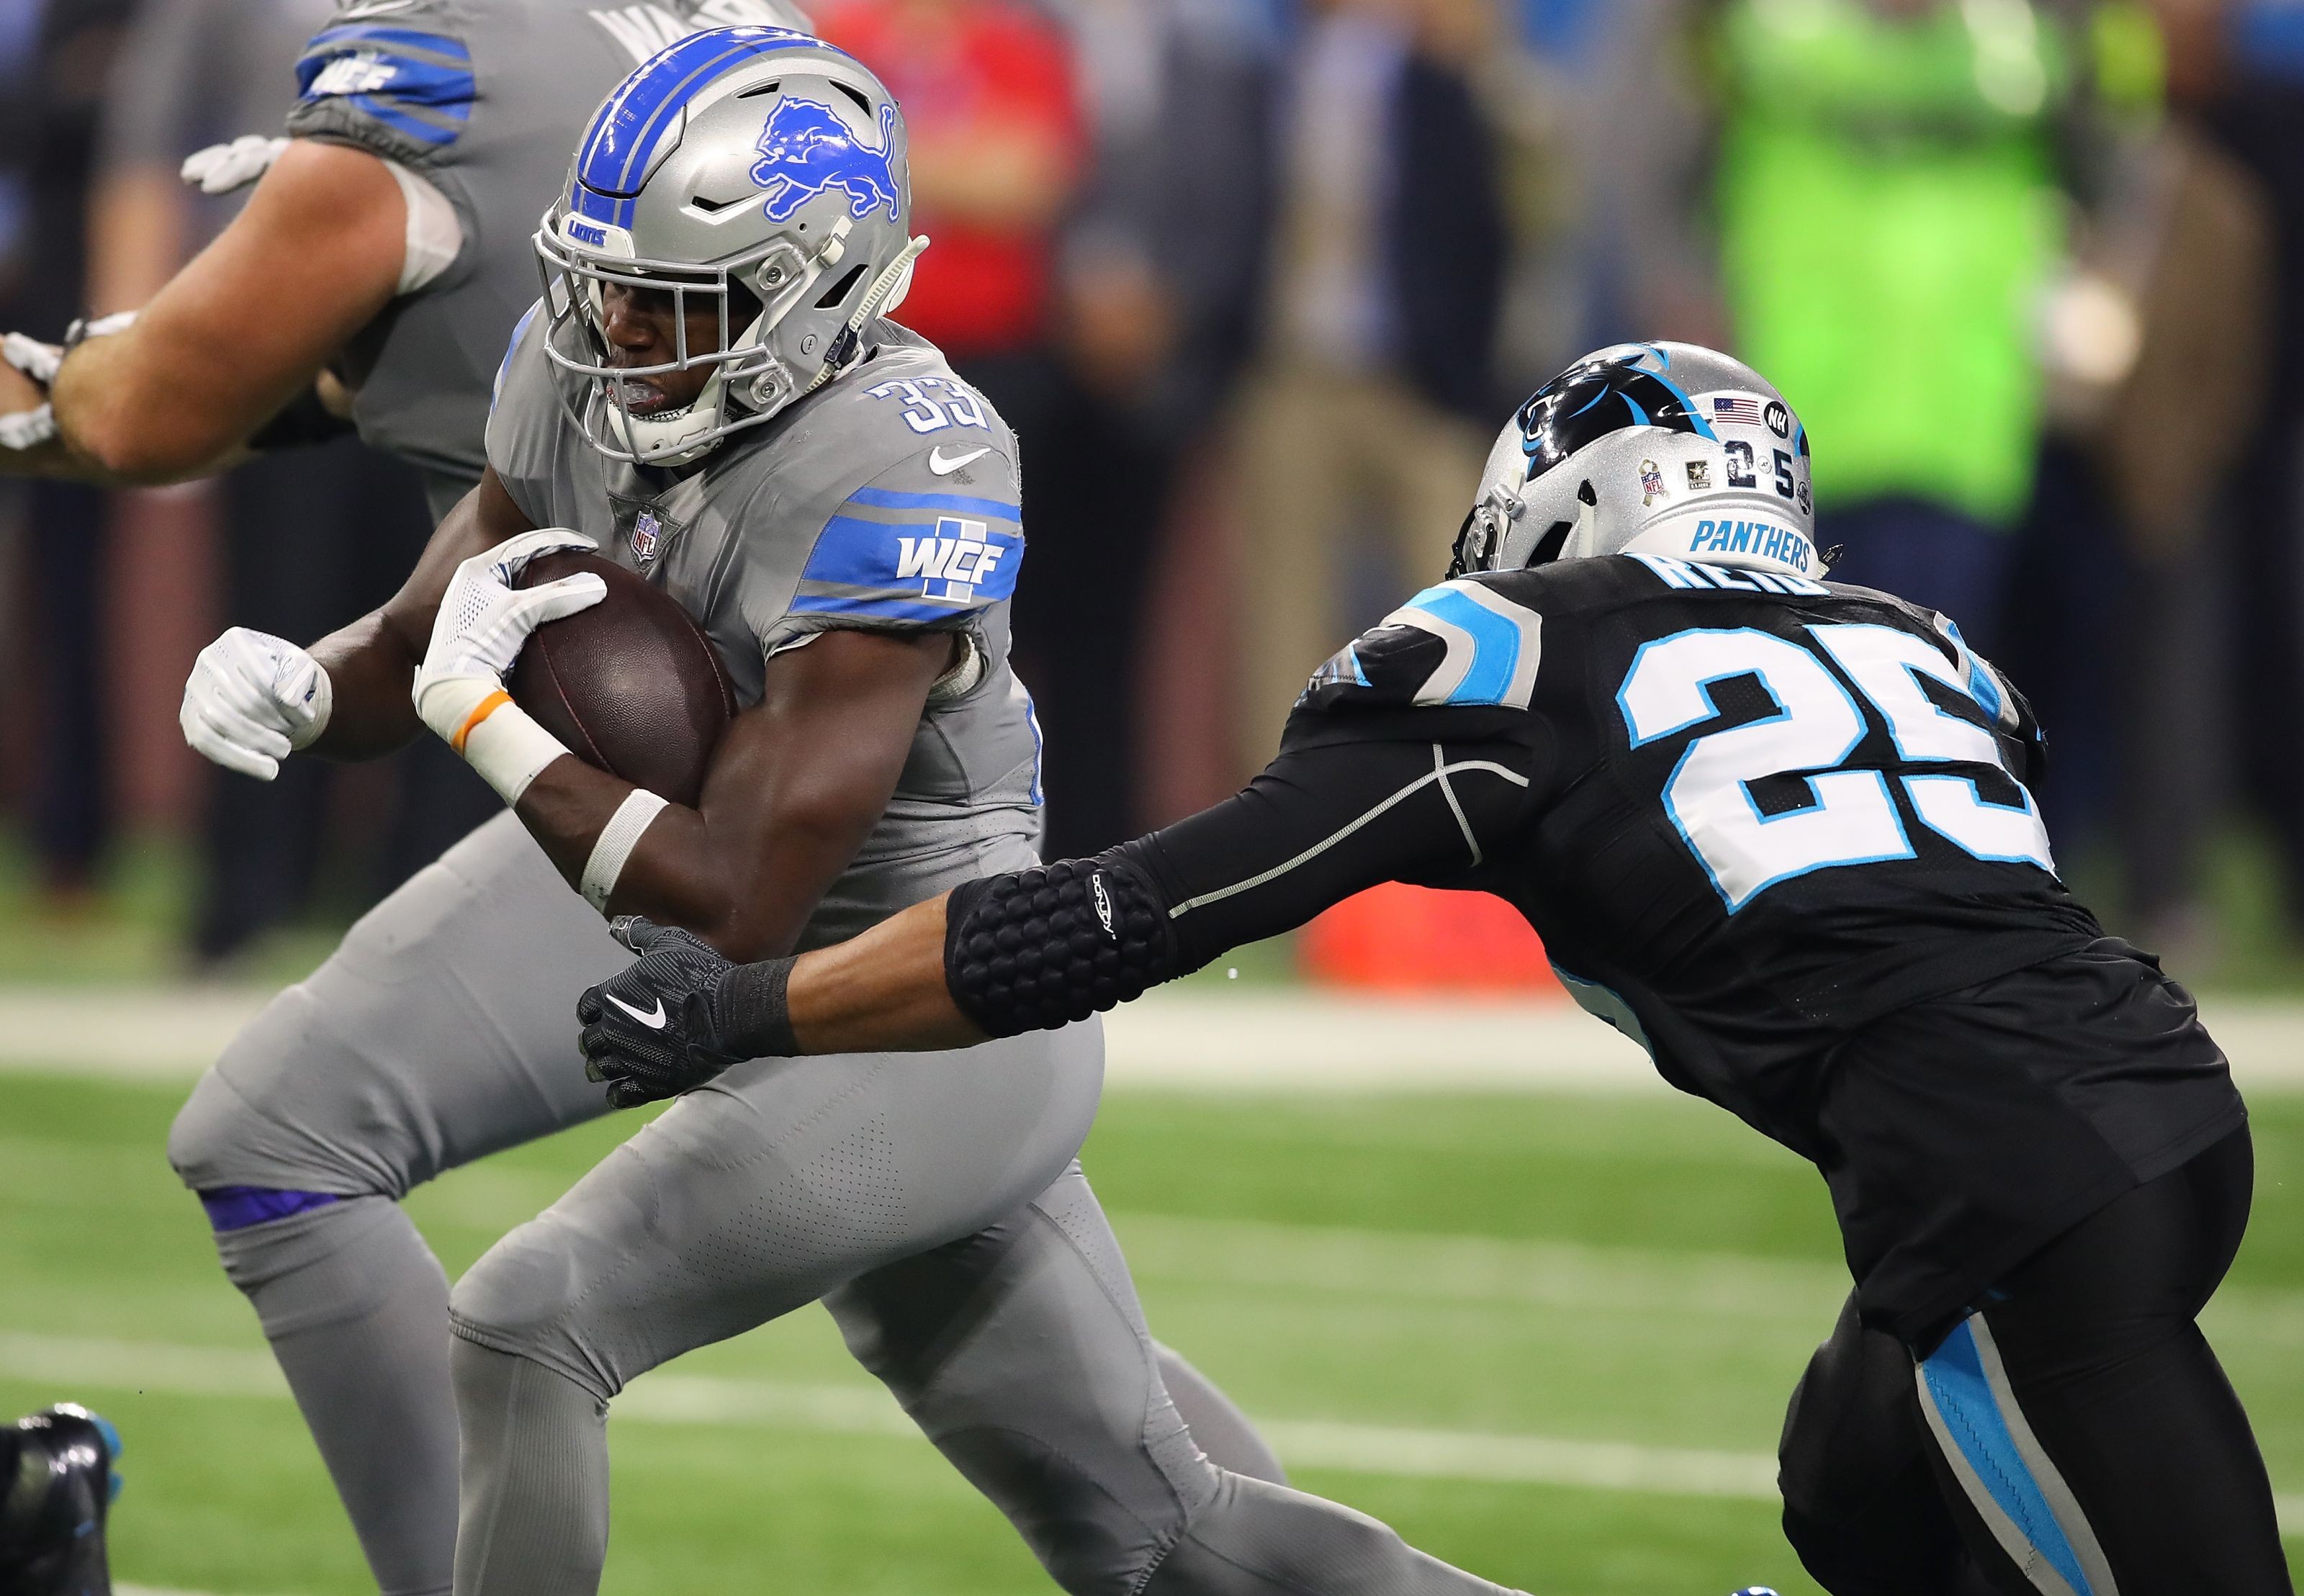 Lions vs Panthers: Detroit ends three game losing skid